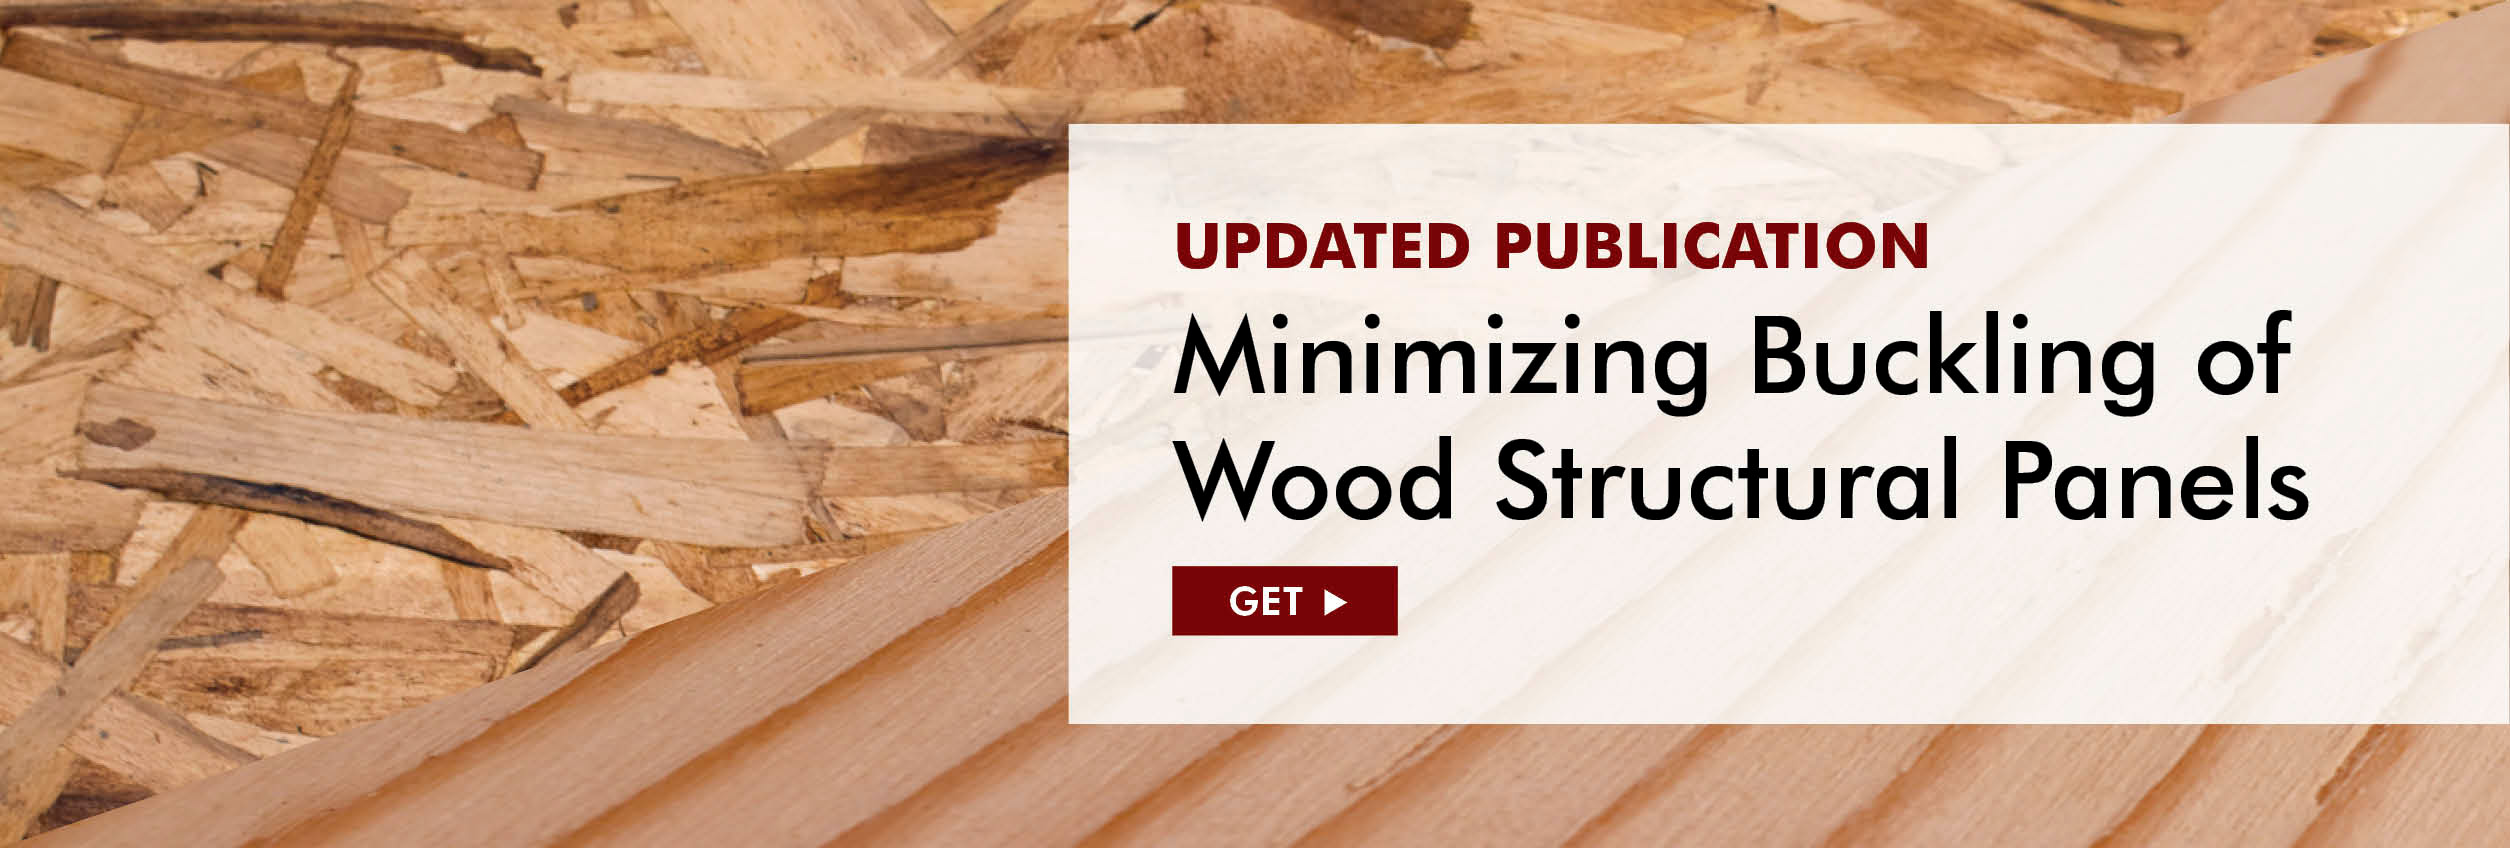 Technical Note: Minimizing Buckling of Wood Structural Panels